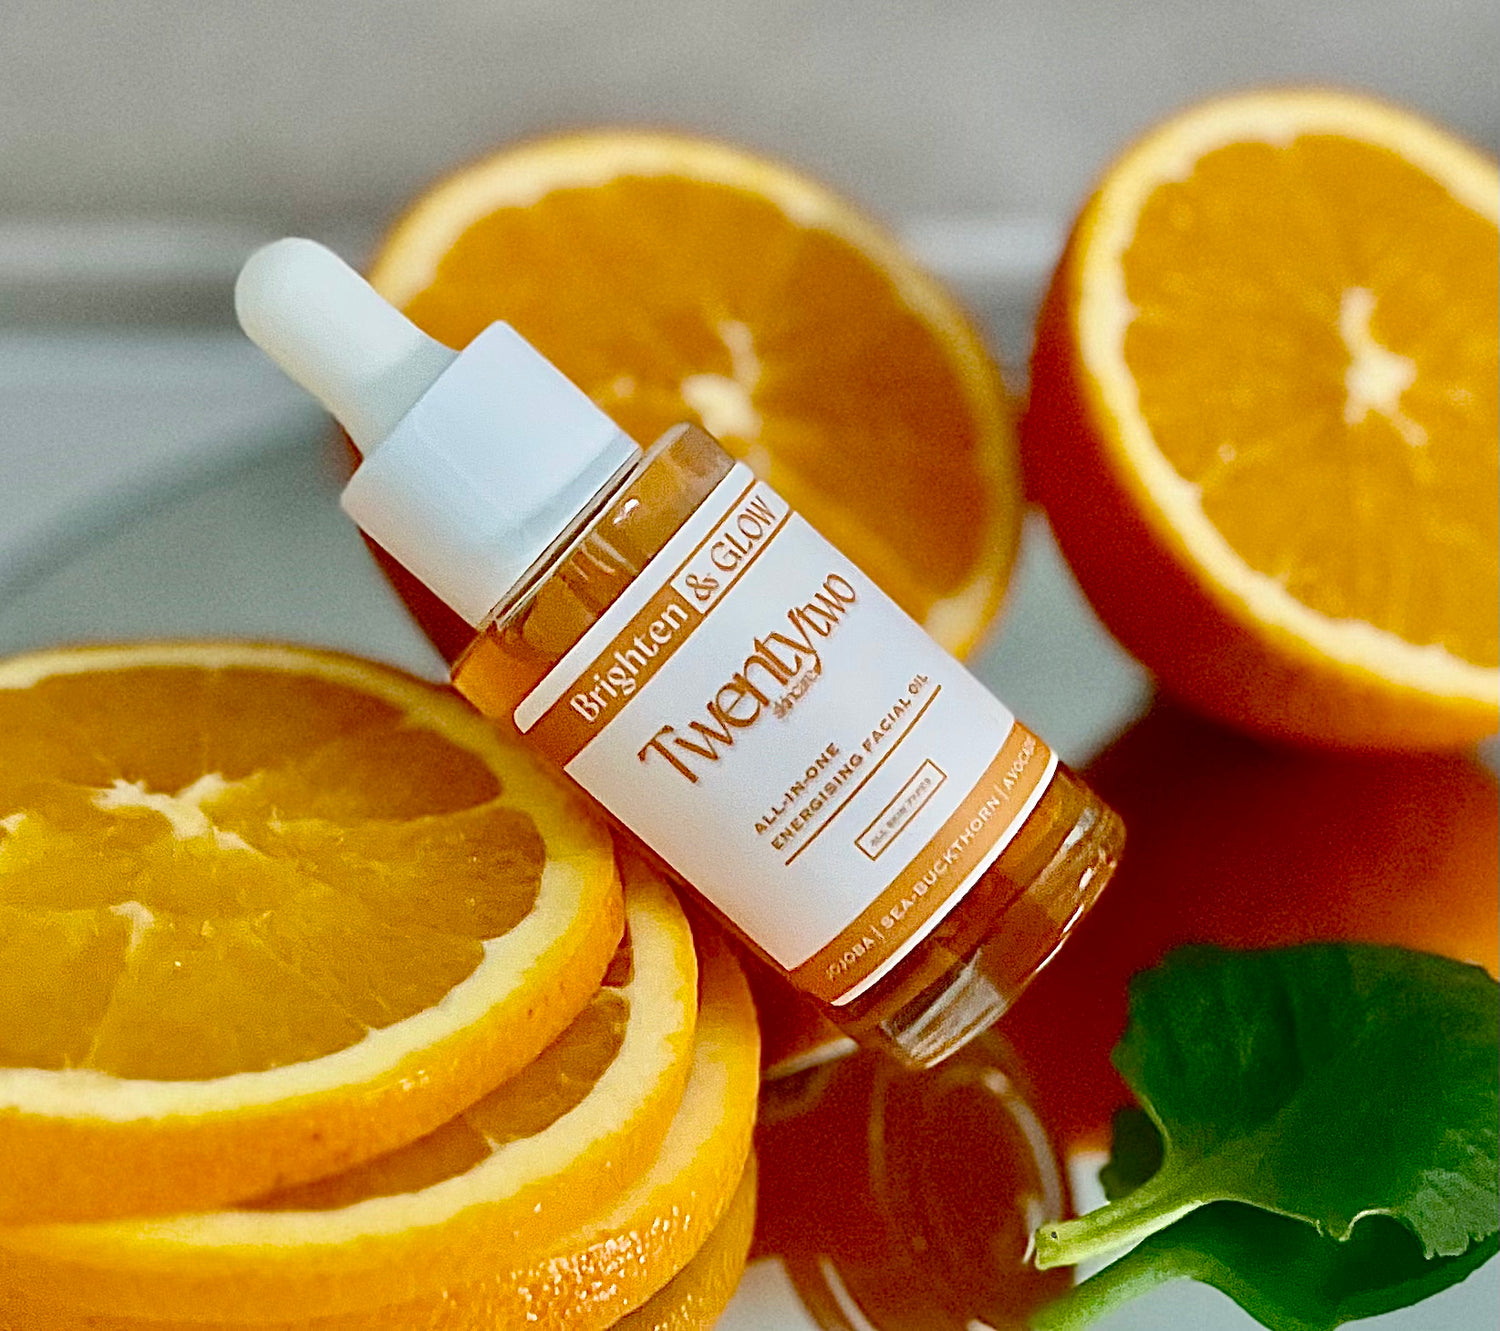 All in one Energising facial oil - glowing - Twentytwo skincare - natural certified skincare